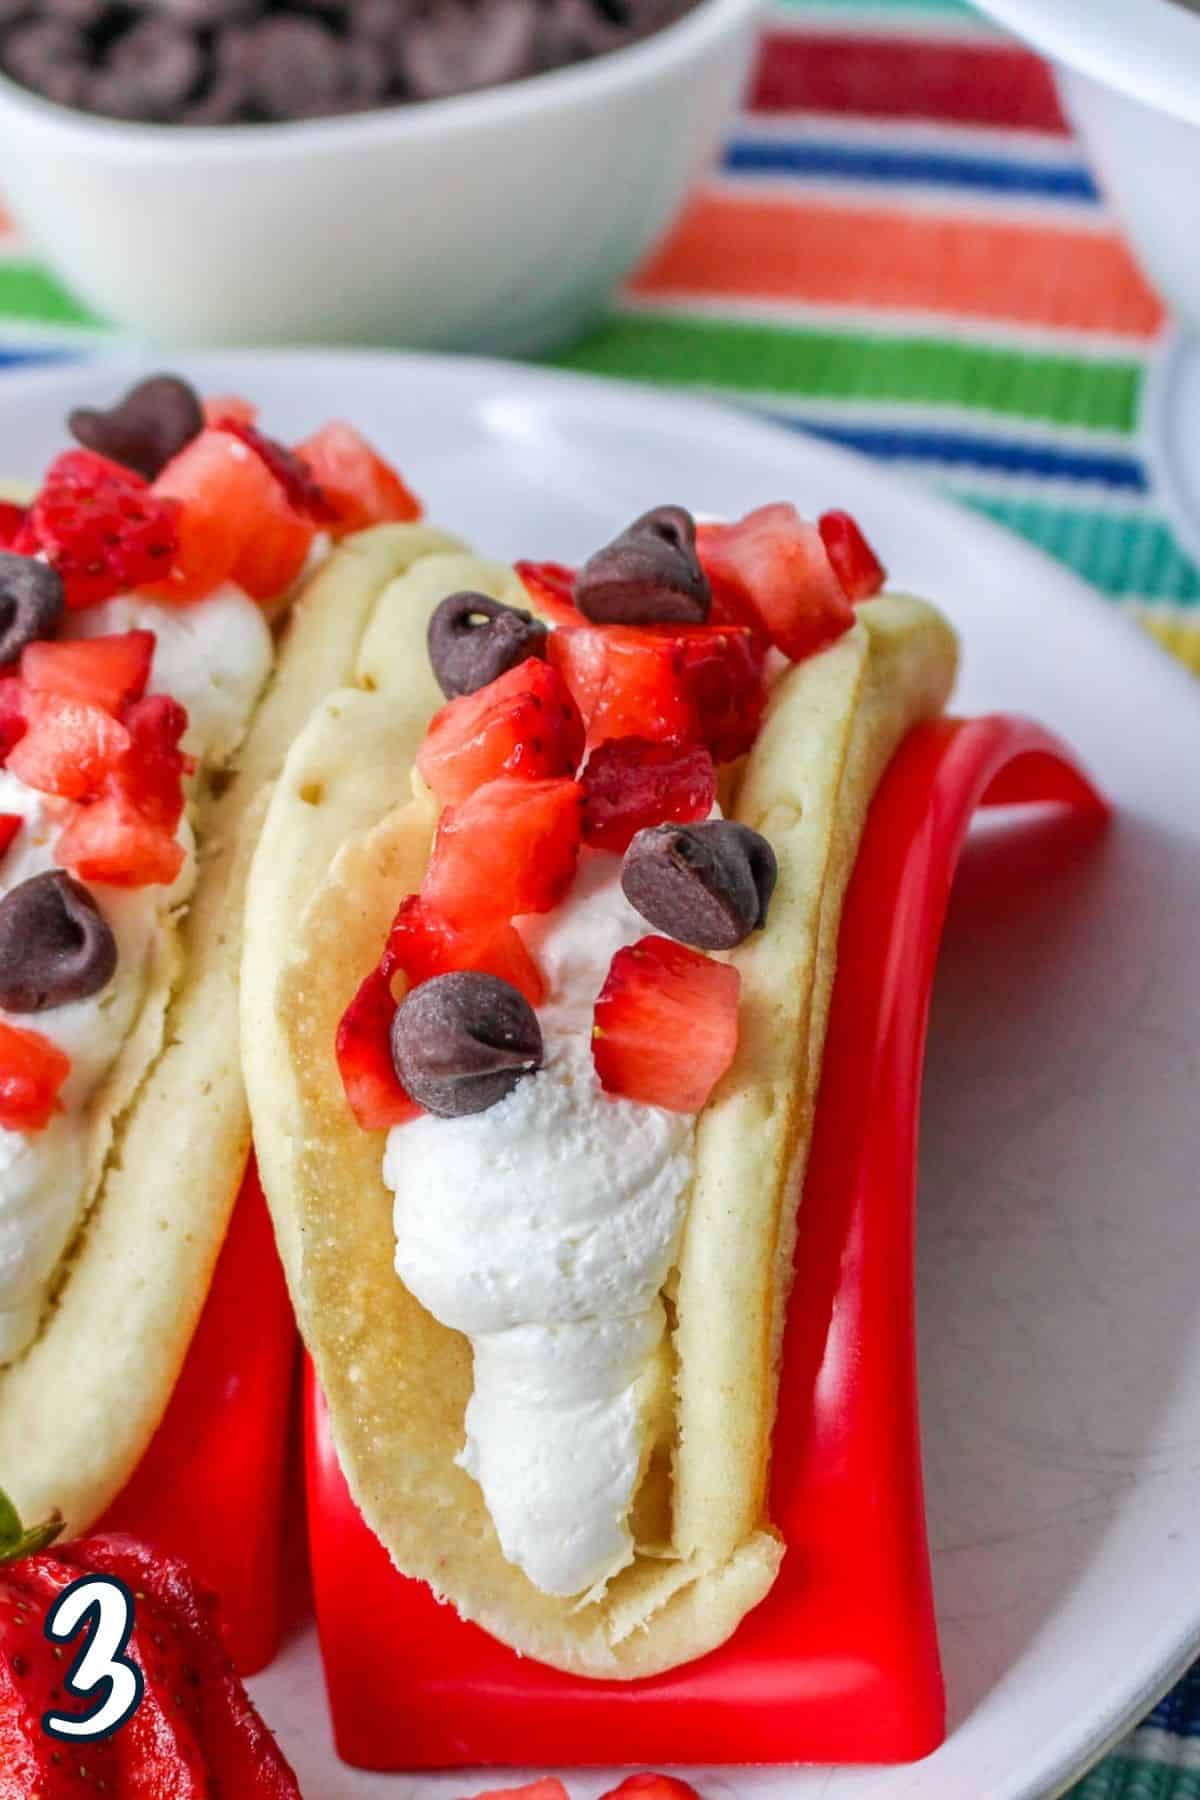 A red taco holders holding a pancake filled with cheesecake mousse and fresh strawberries with chocolate chips. 